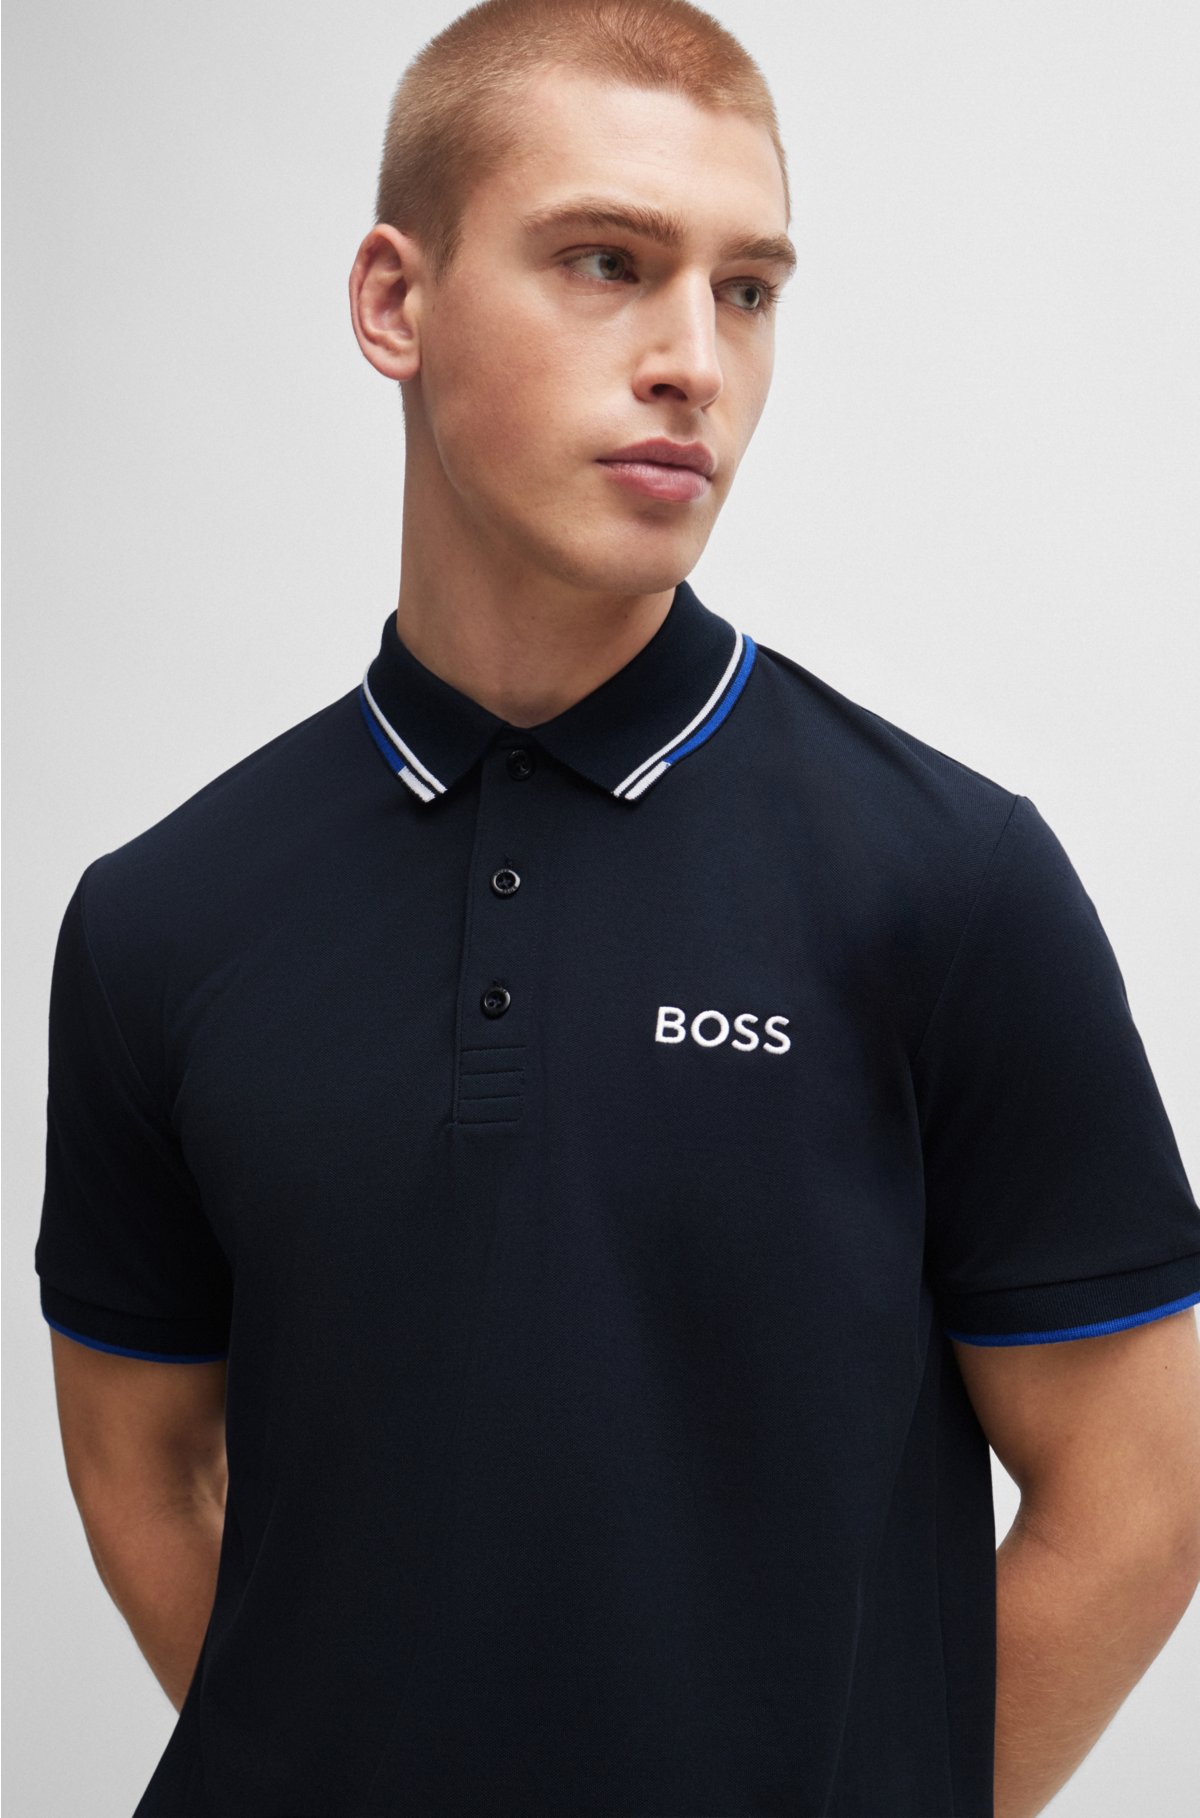 - BOSS contrast with logos shirt polo Cotton-blend